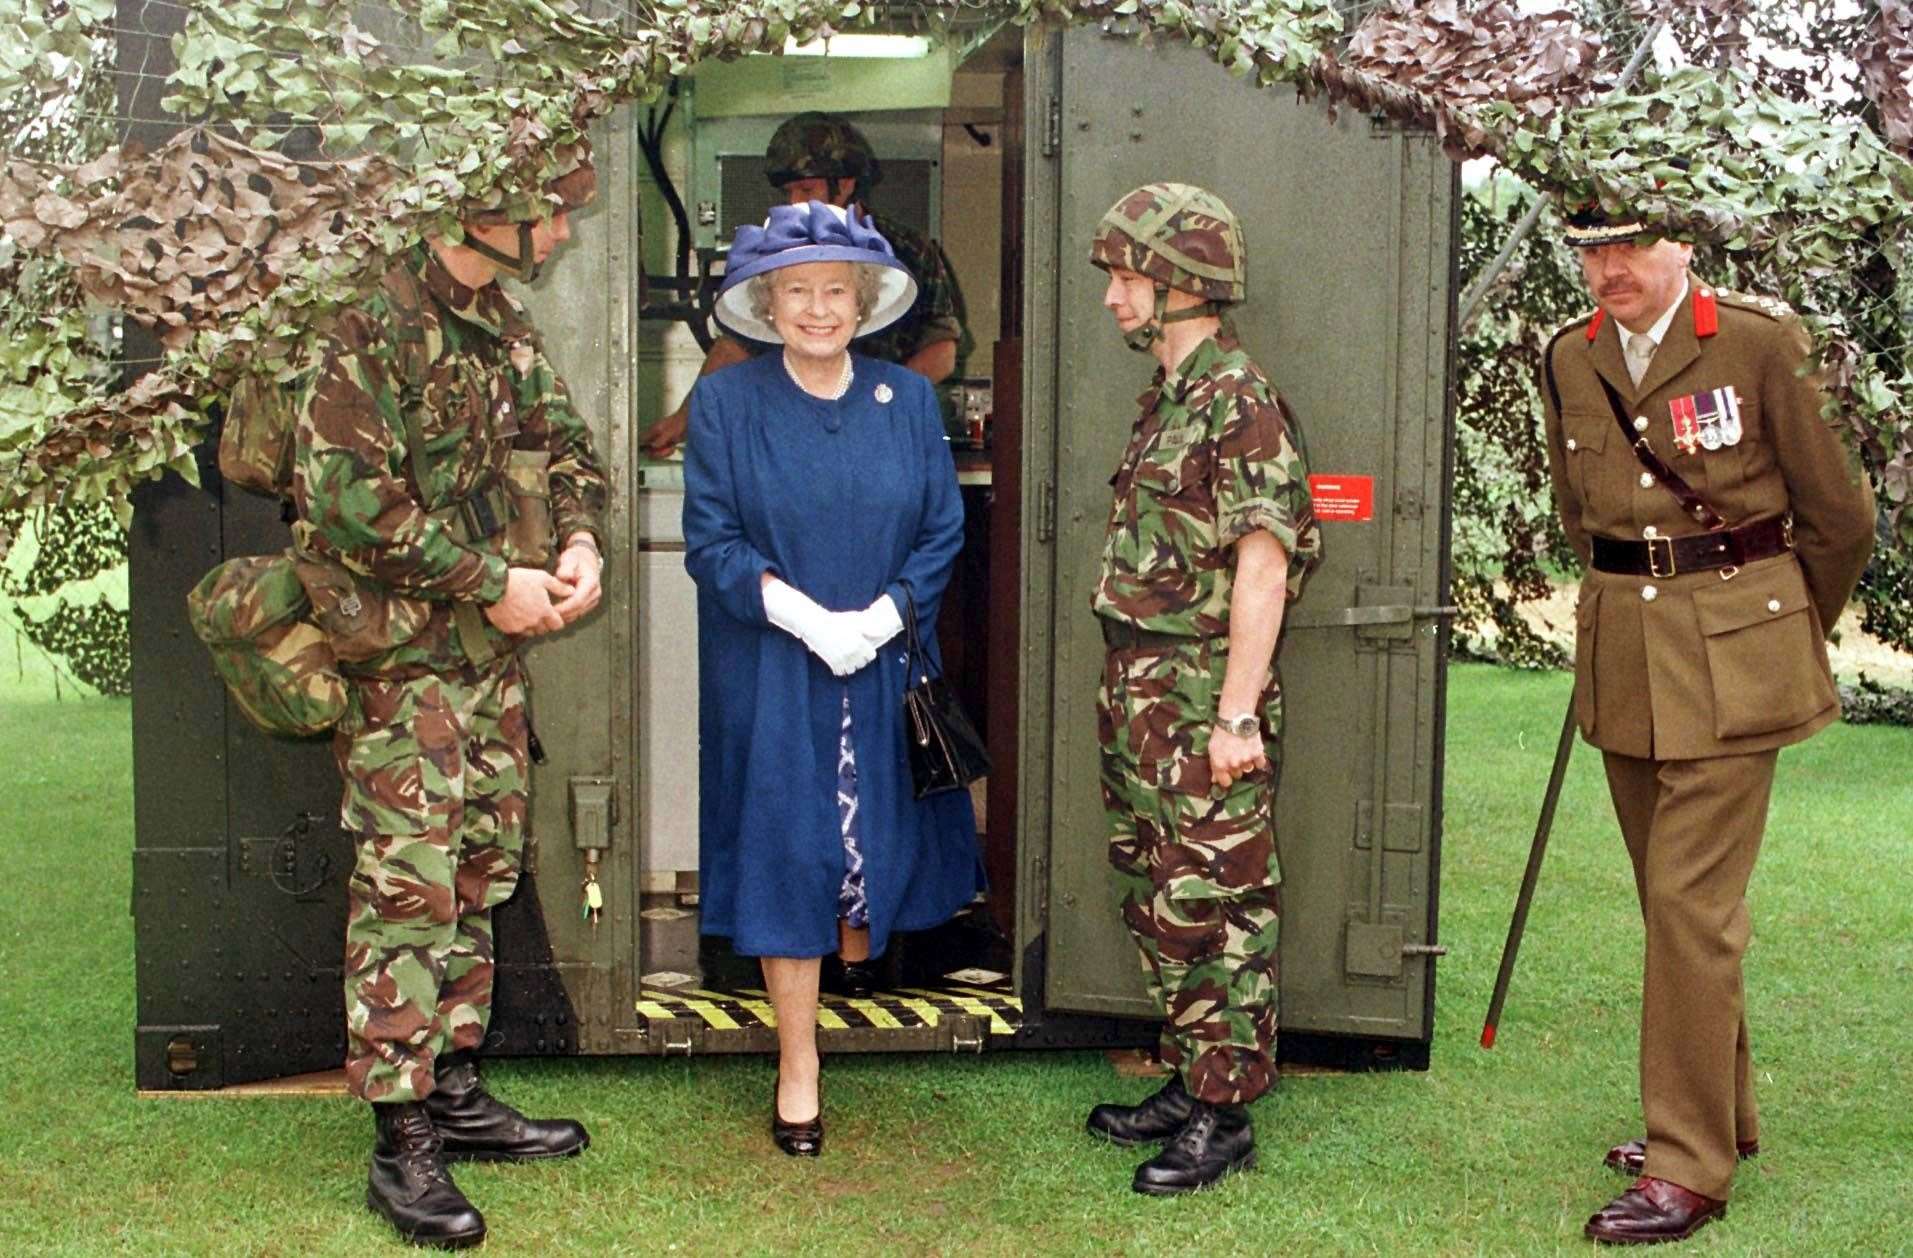 The Queen, as Colonel-in-Chief of the Corps of the Royal Engineers, visits the 42 survey Engineer Group at Denison Barracks in Hermitage, Berkshire, in 1998 (Tim Ockenden/PA)